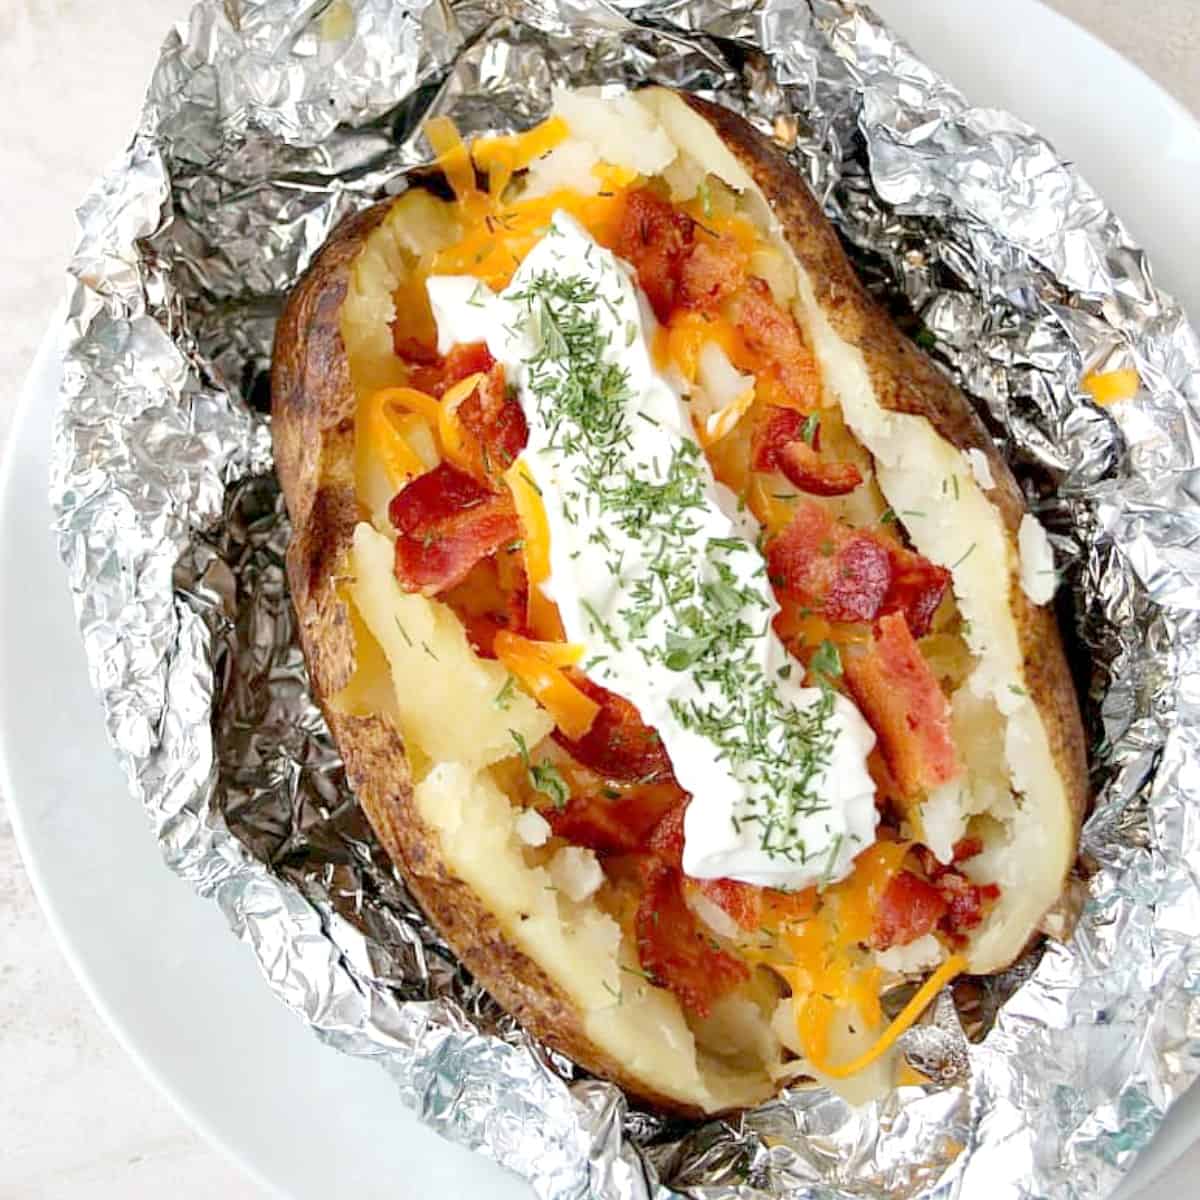 Baked potato in a foil with topping.